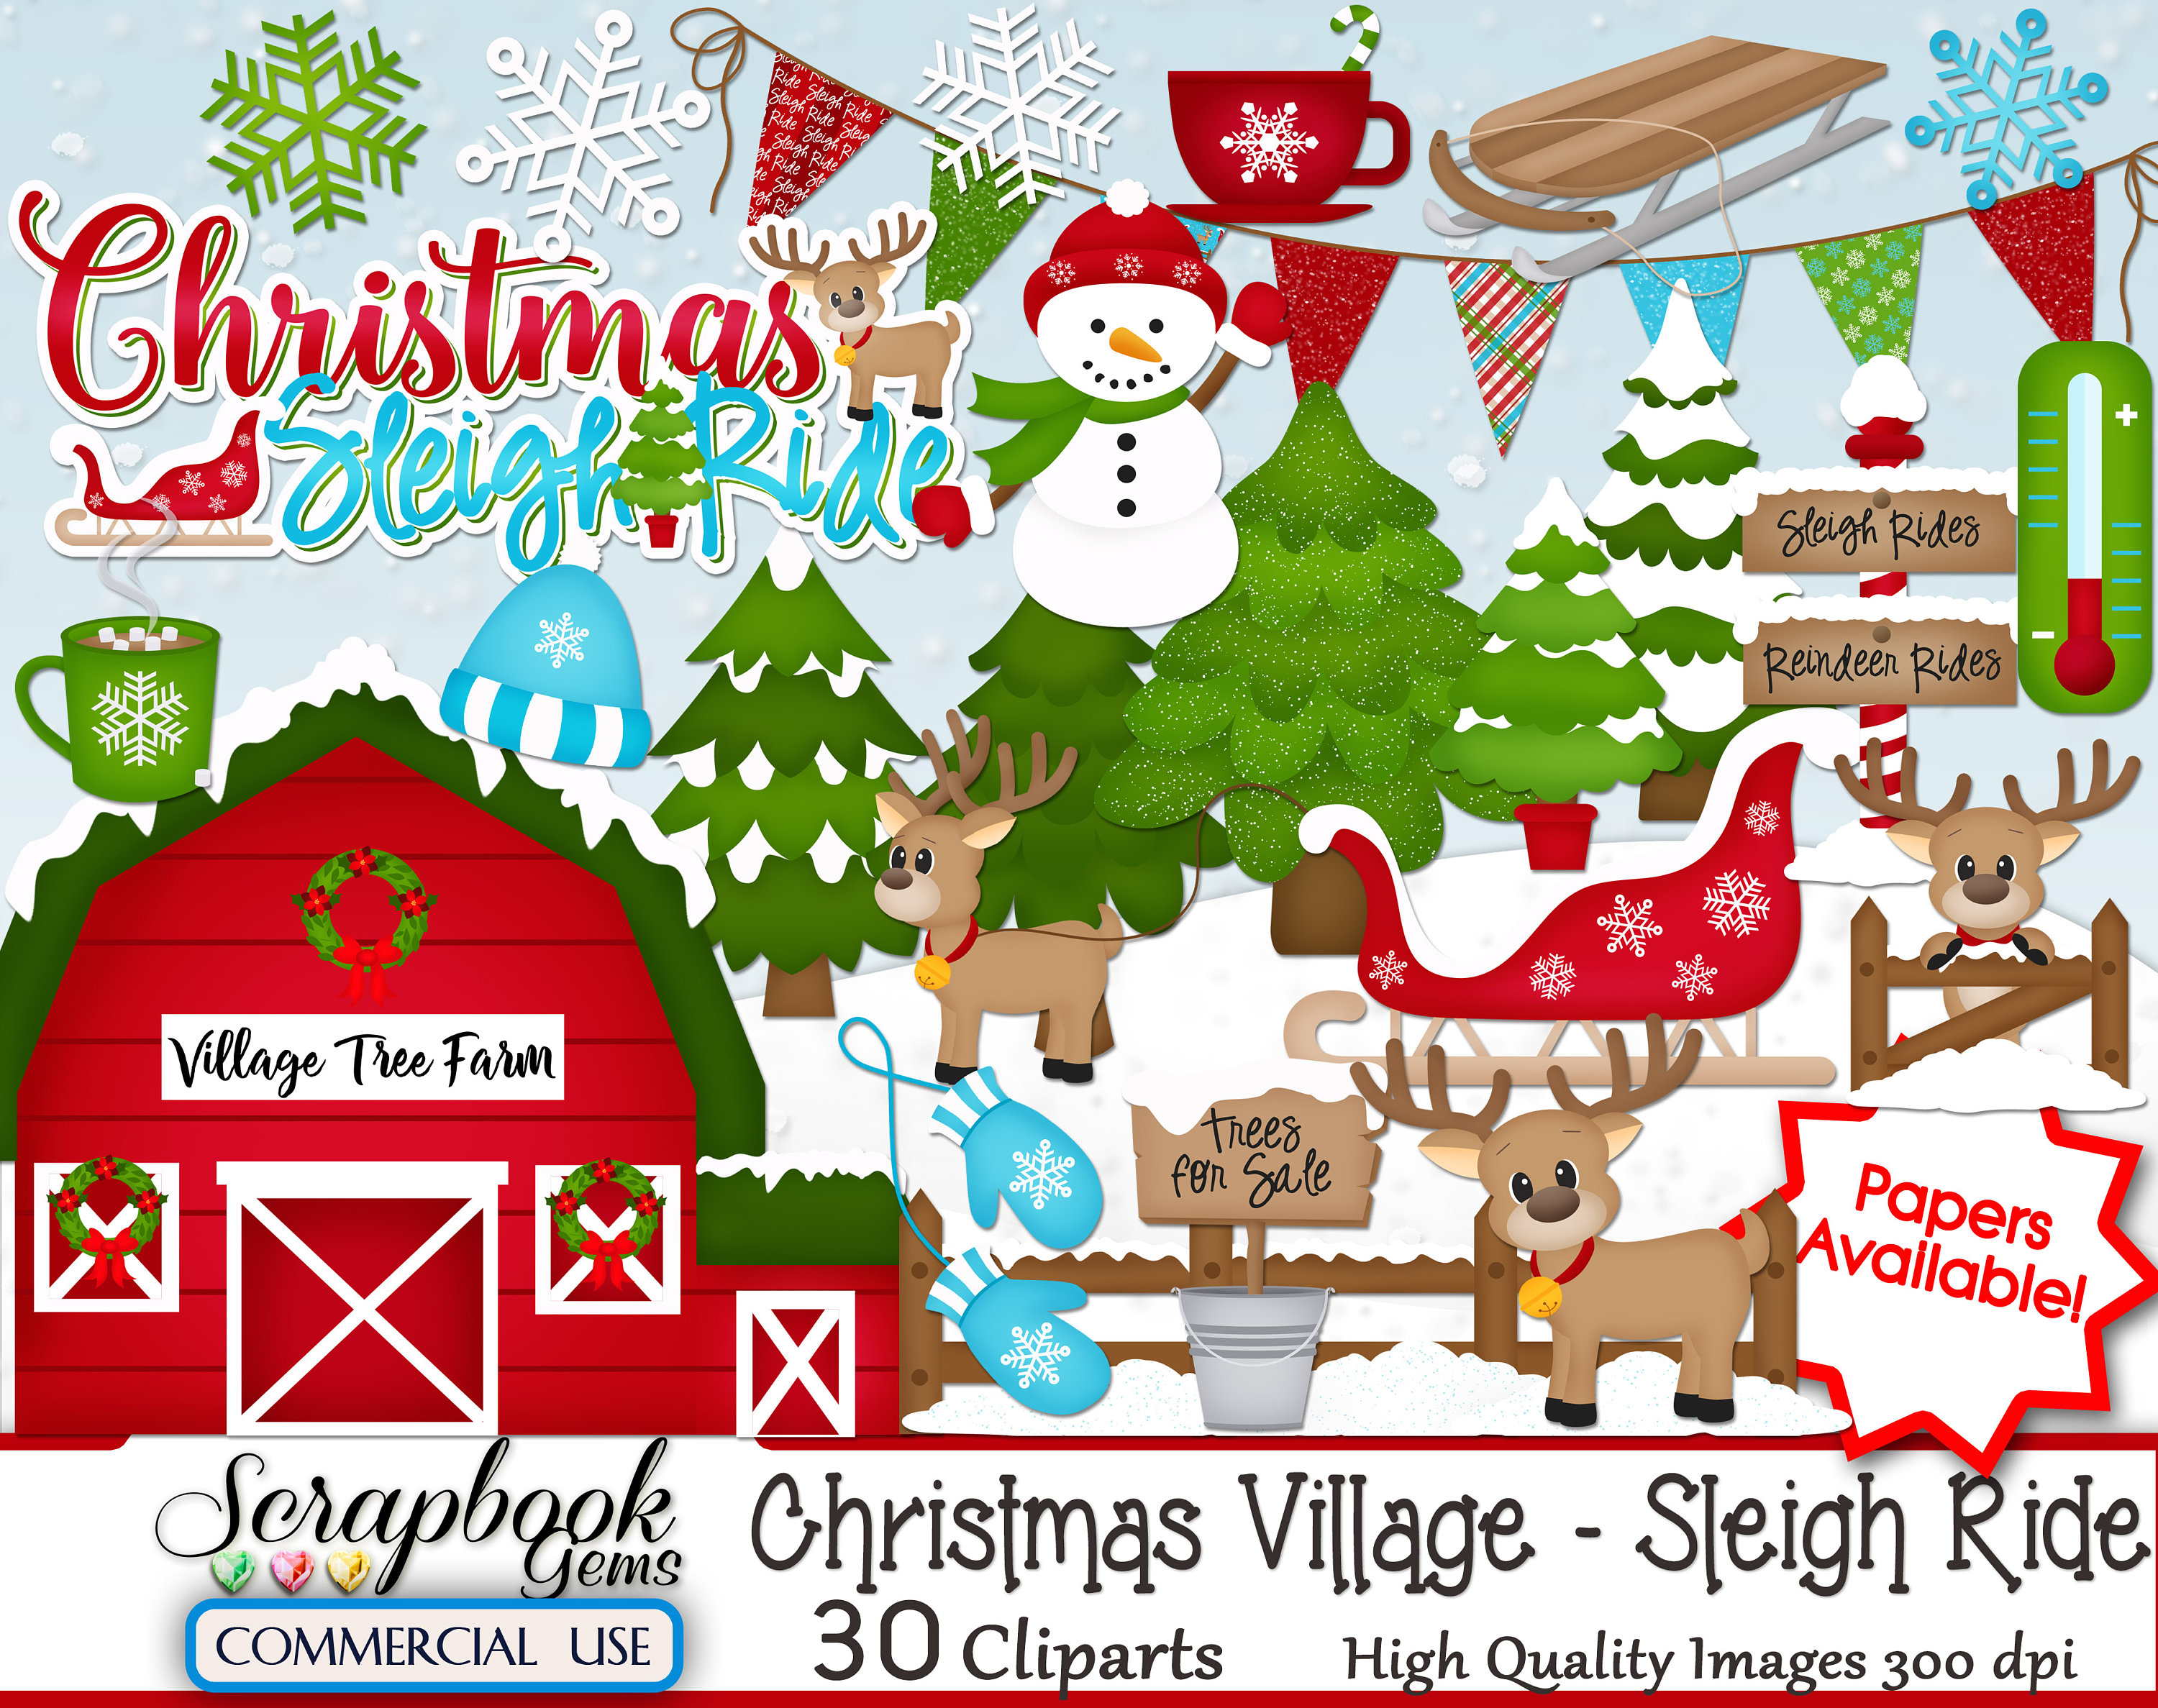 CHRISTMAS SLEIGH RIDE Clipart, 30 png Clipart files, Instant Download,  winter, snowman, village, reindeer, pine tree, snowman, mittens, snow.